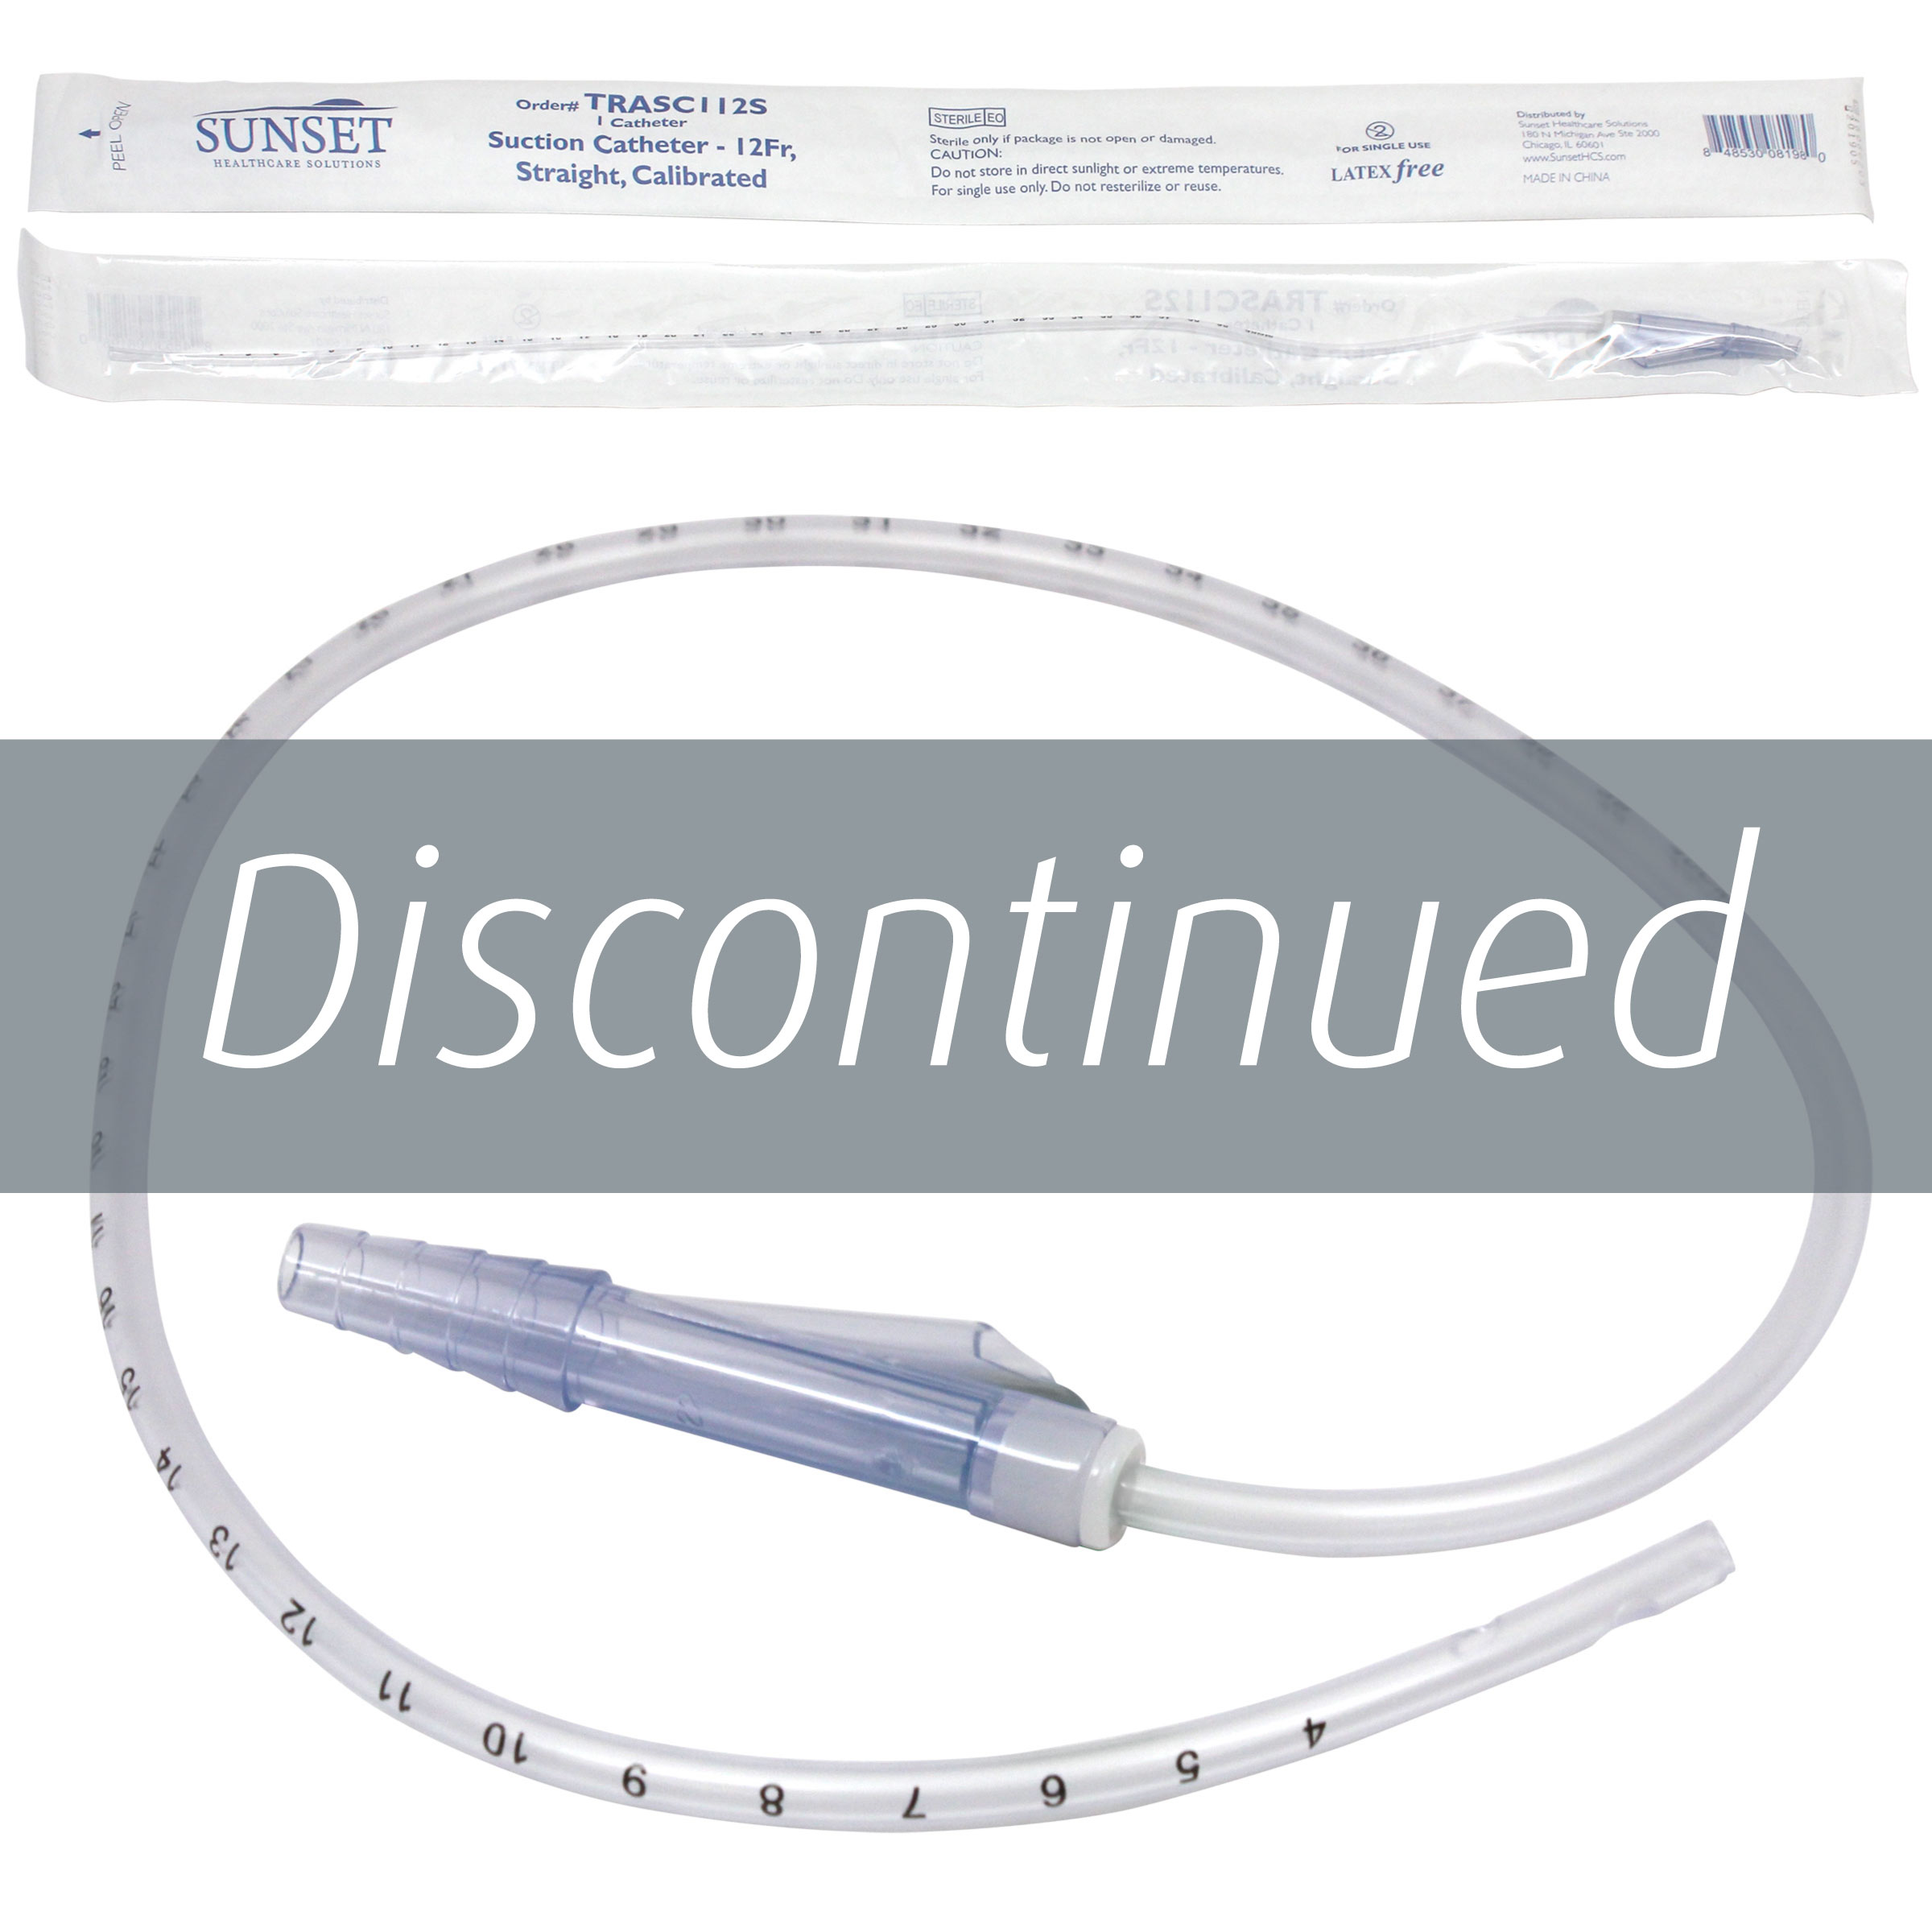 Catheters – Straight, Calibrated, Directional Y-Valve, Whistle Tip with "Discontinued" overlay